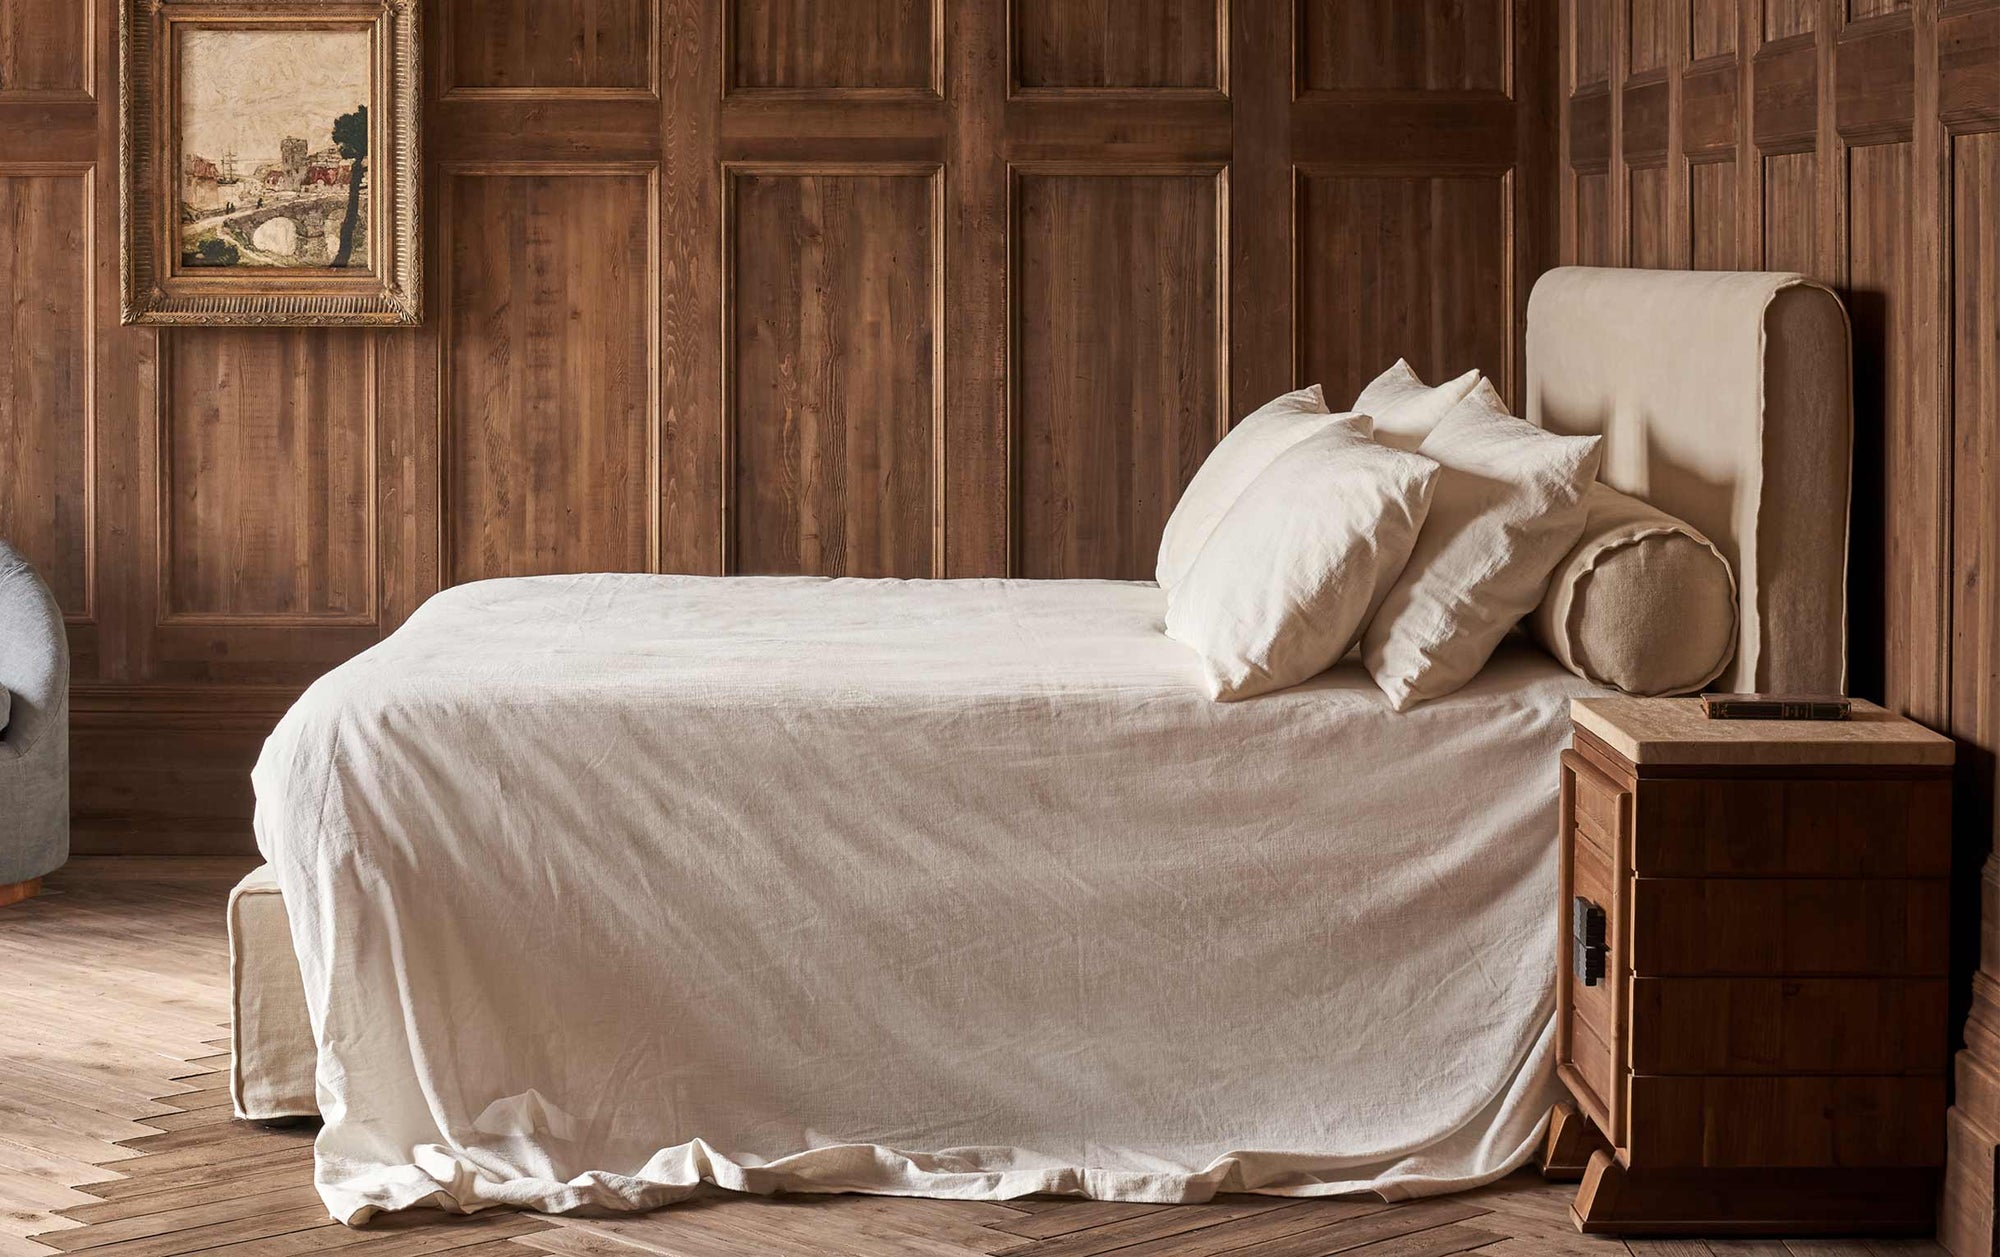 Camino Bed in Warm Oatmeal, a light warm beige Medium Weight Linen, placed in a wood panelled room and made with white linen bedding, next to a custom wooden side table